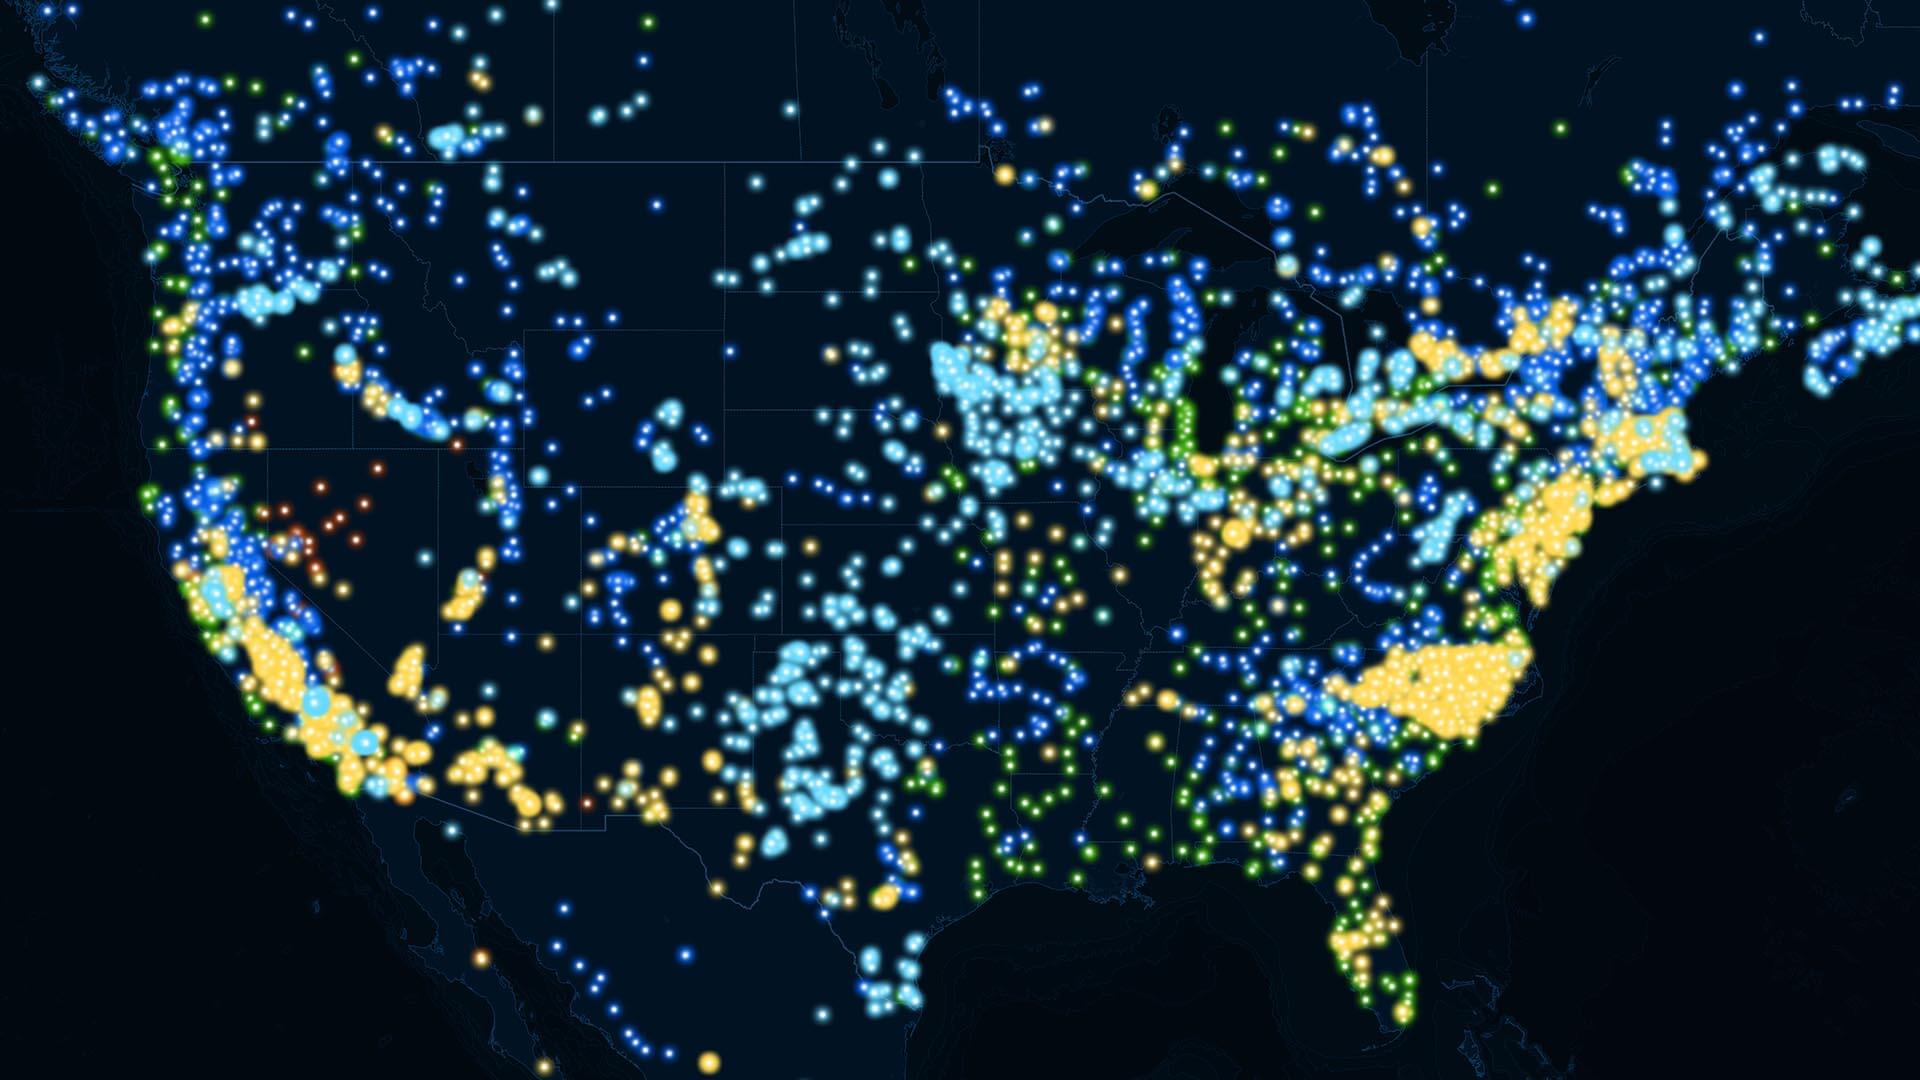 A United States map with blue and yellow dots--dummy data to symbolize internet access